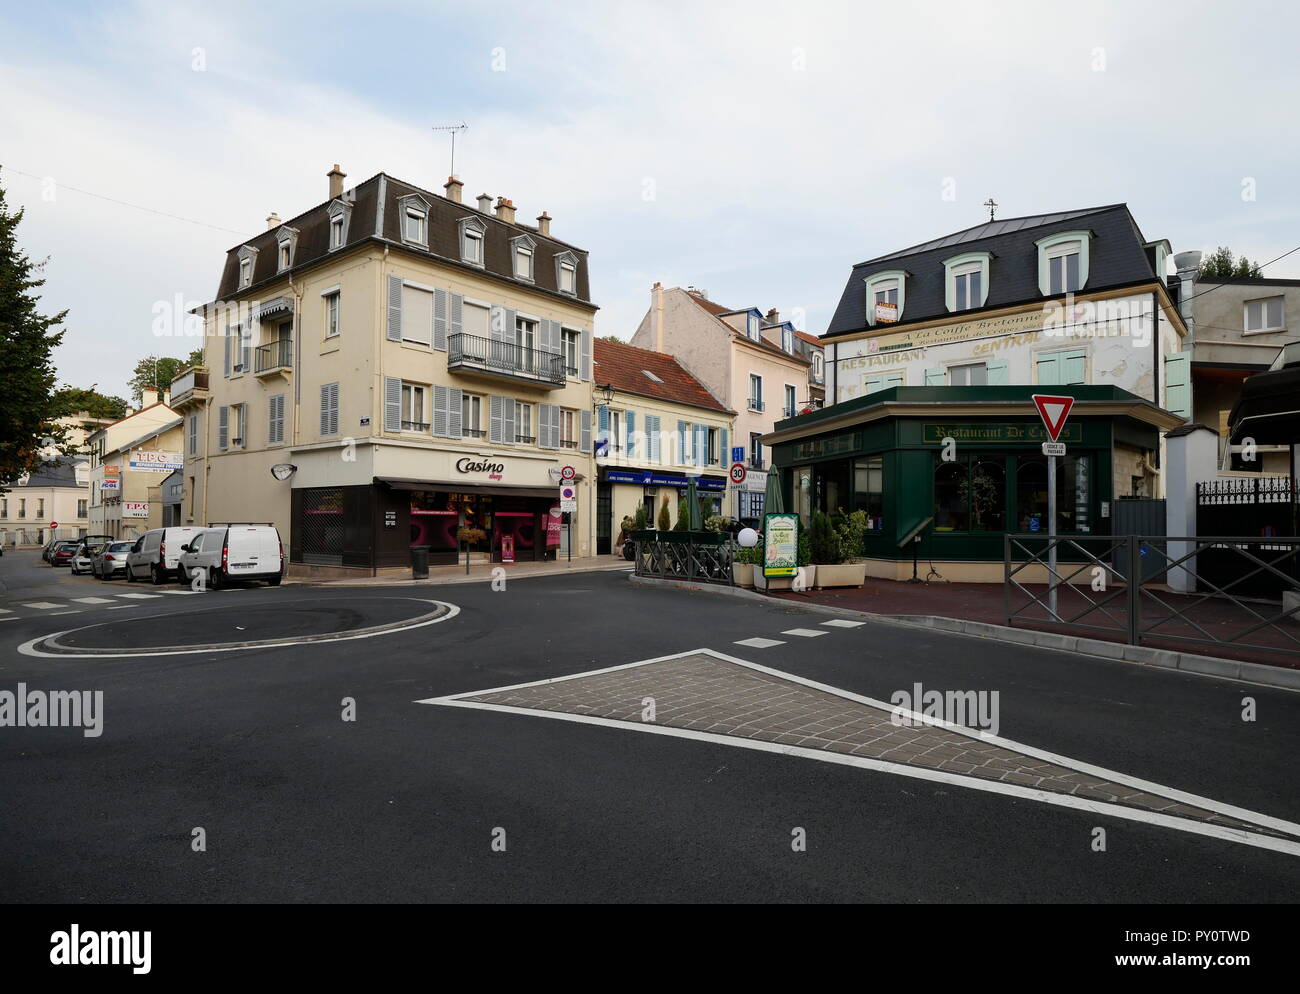 AJAXNETPHOTO. BOUGIVAL, FRANCE. - VILLAGE CENTRE - BOUGIVAL CENTRE AS IT IS TODAY. PHOTO:JONATHAN EASTLAND/AJAX REF:GX8 181909 443 Stock Photo